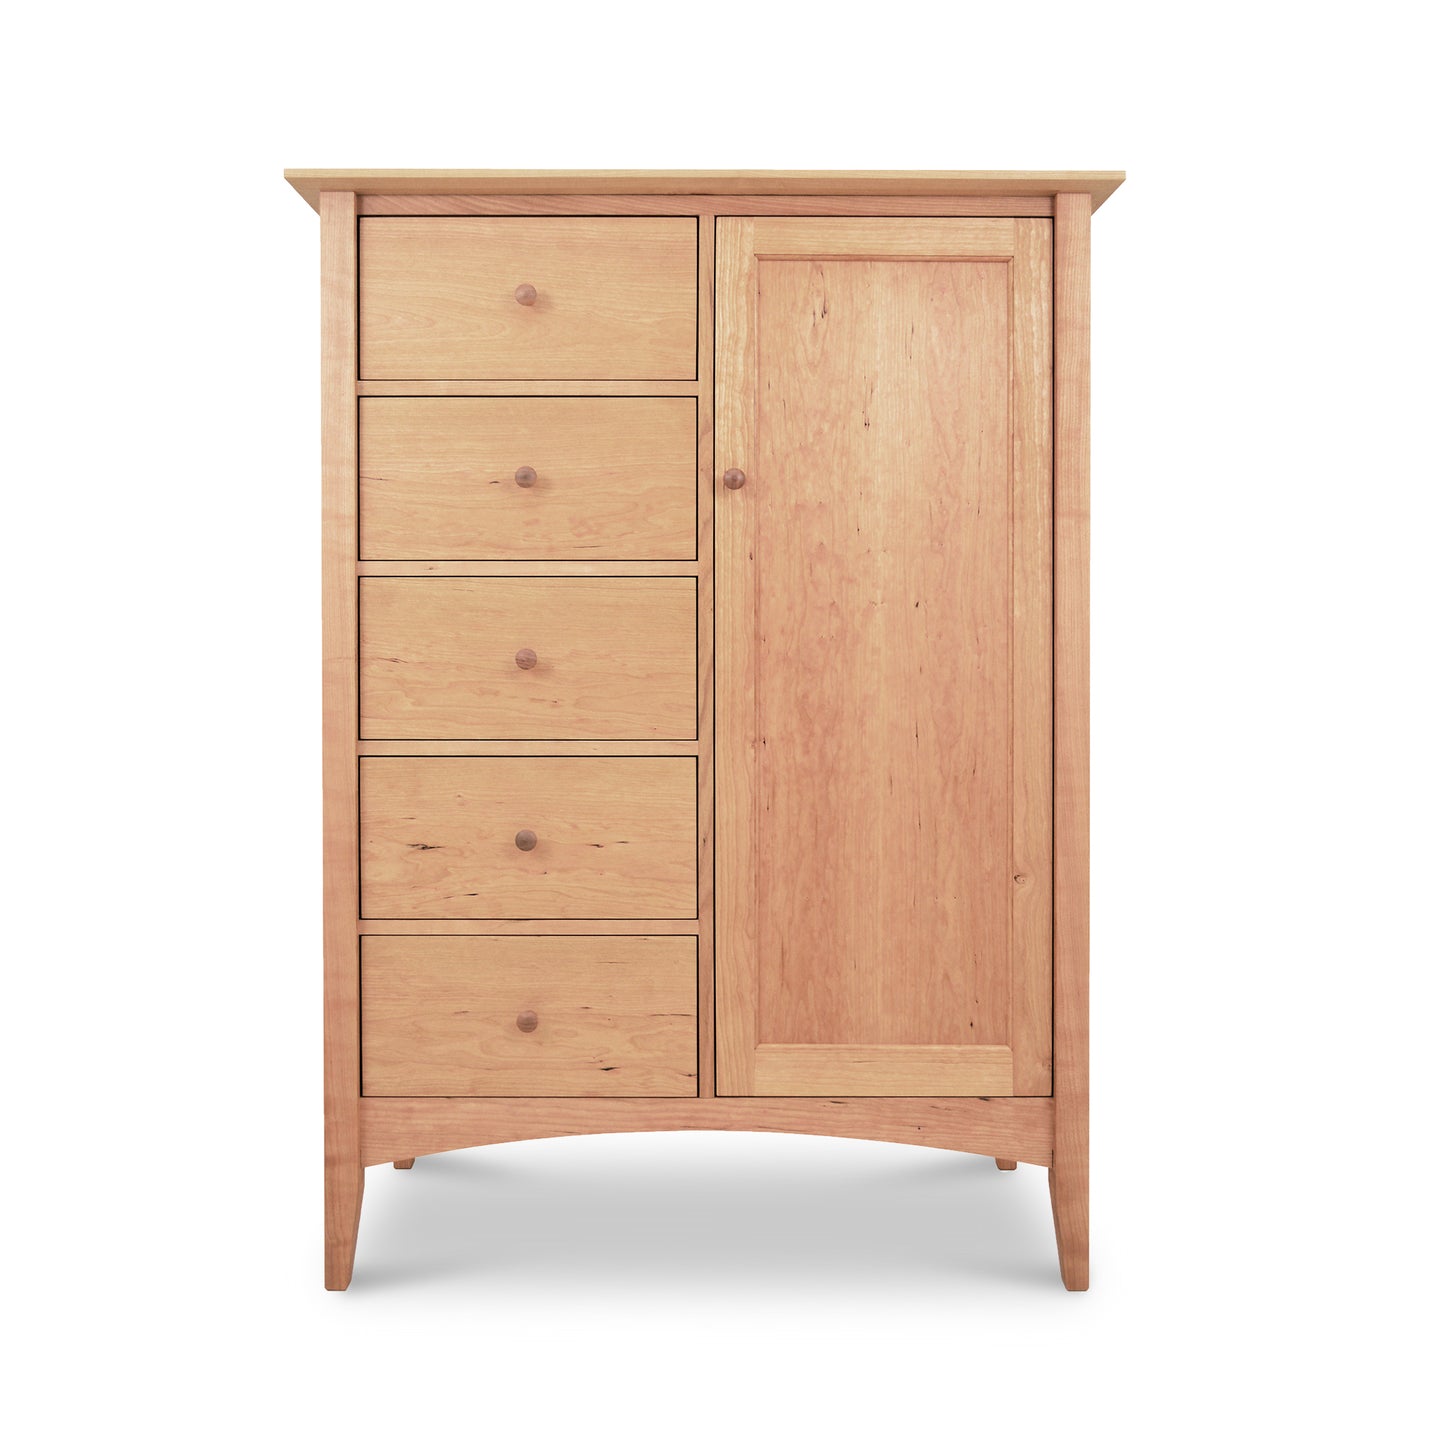 American Shaker Sweater Chest wardrobe with seven drawers on the left and a single door on the right, featuring solid hardwood construction, isolated on a white background by Maple Corner Woodworks.